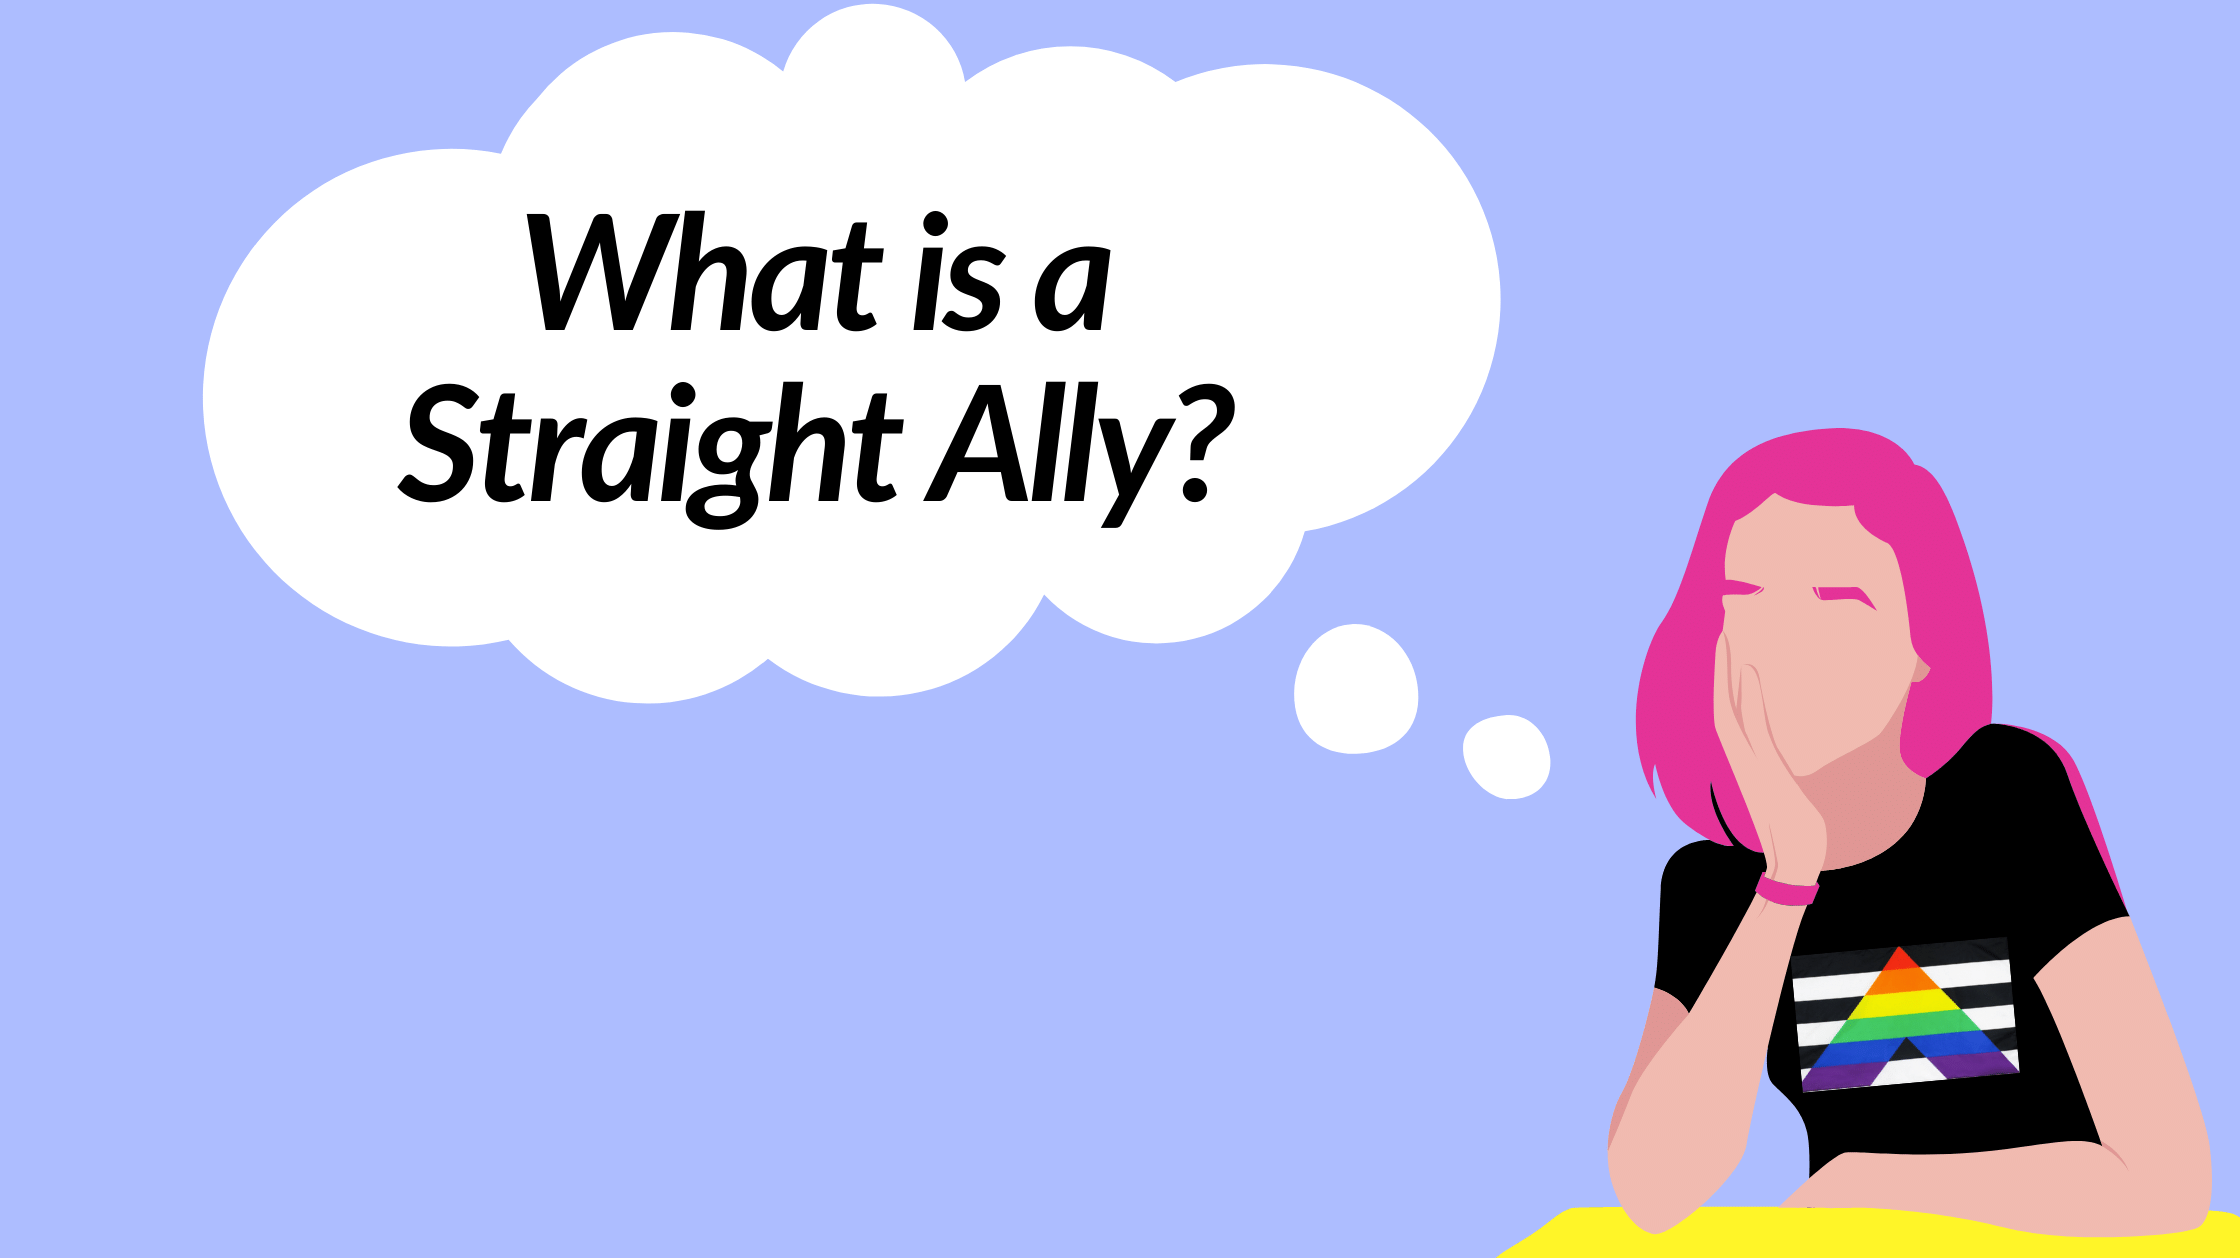 What is a Straight Ally?